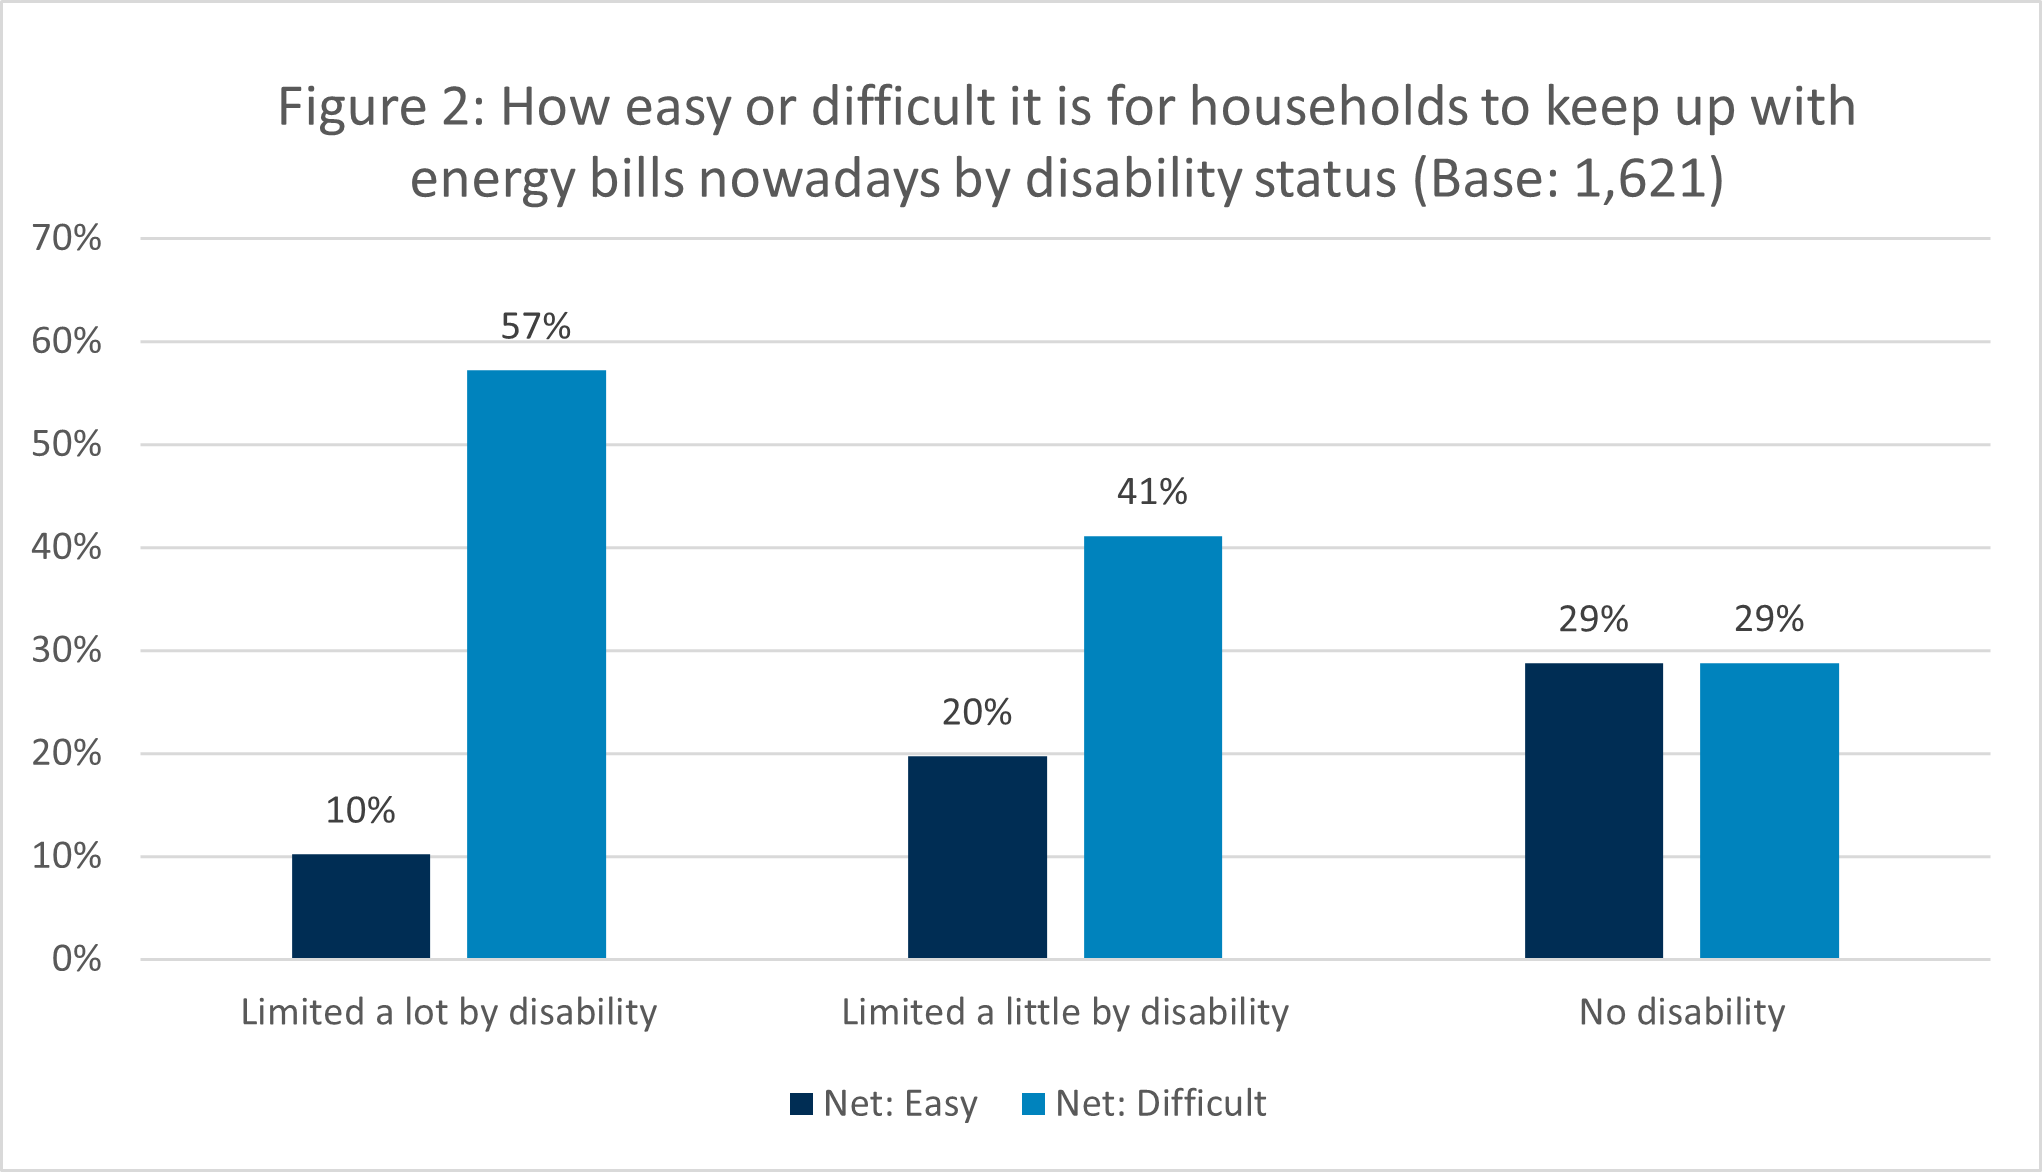 The figures show 10% of people limited a lot by disability found it easy to keep up with their energy bills compared to 29% of those with no disability